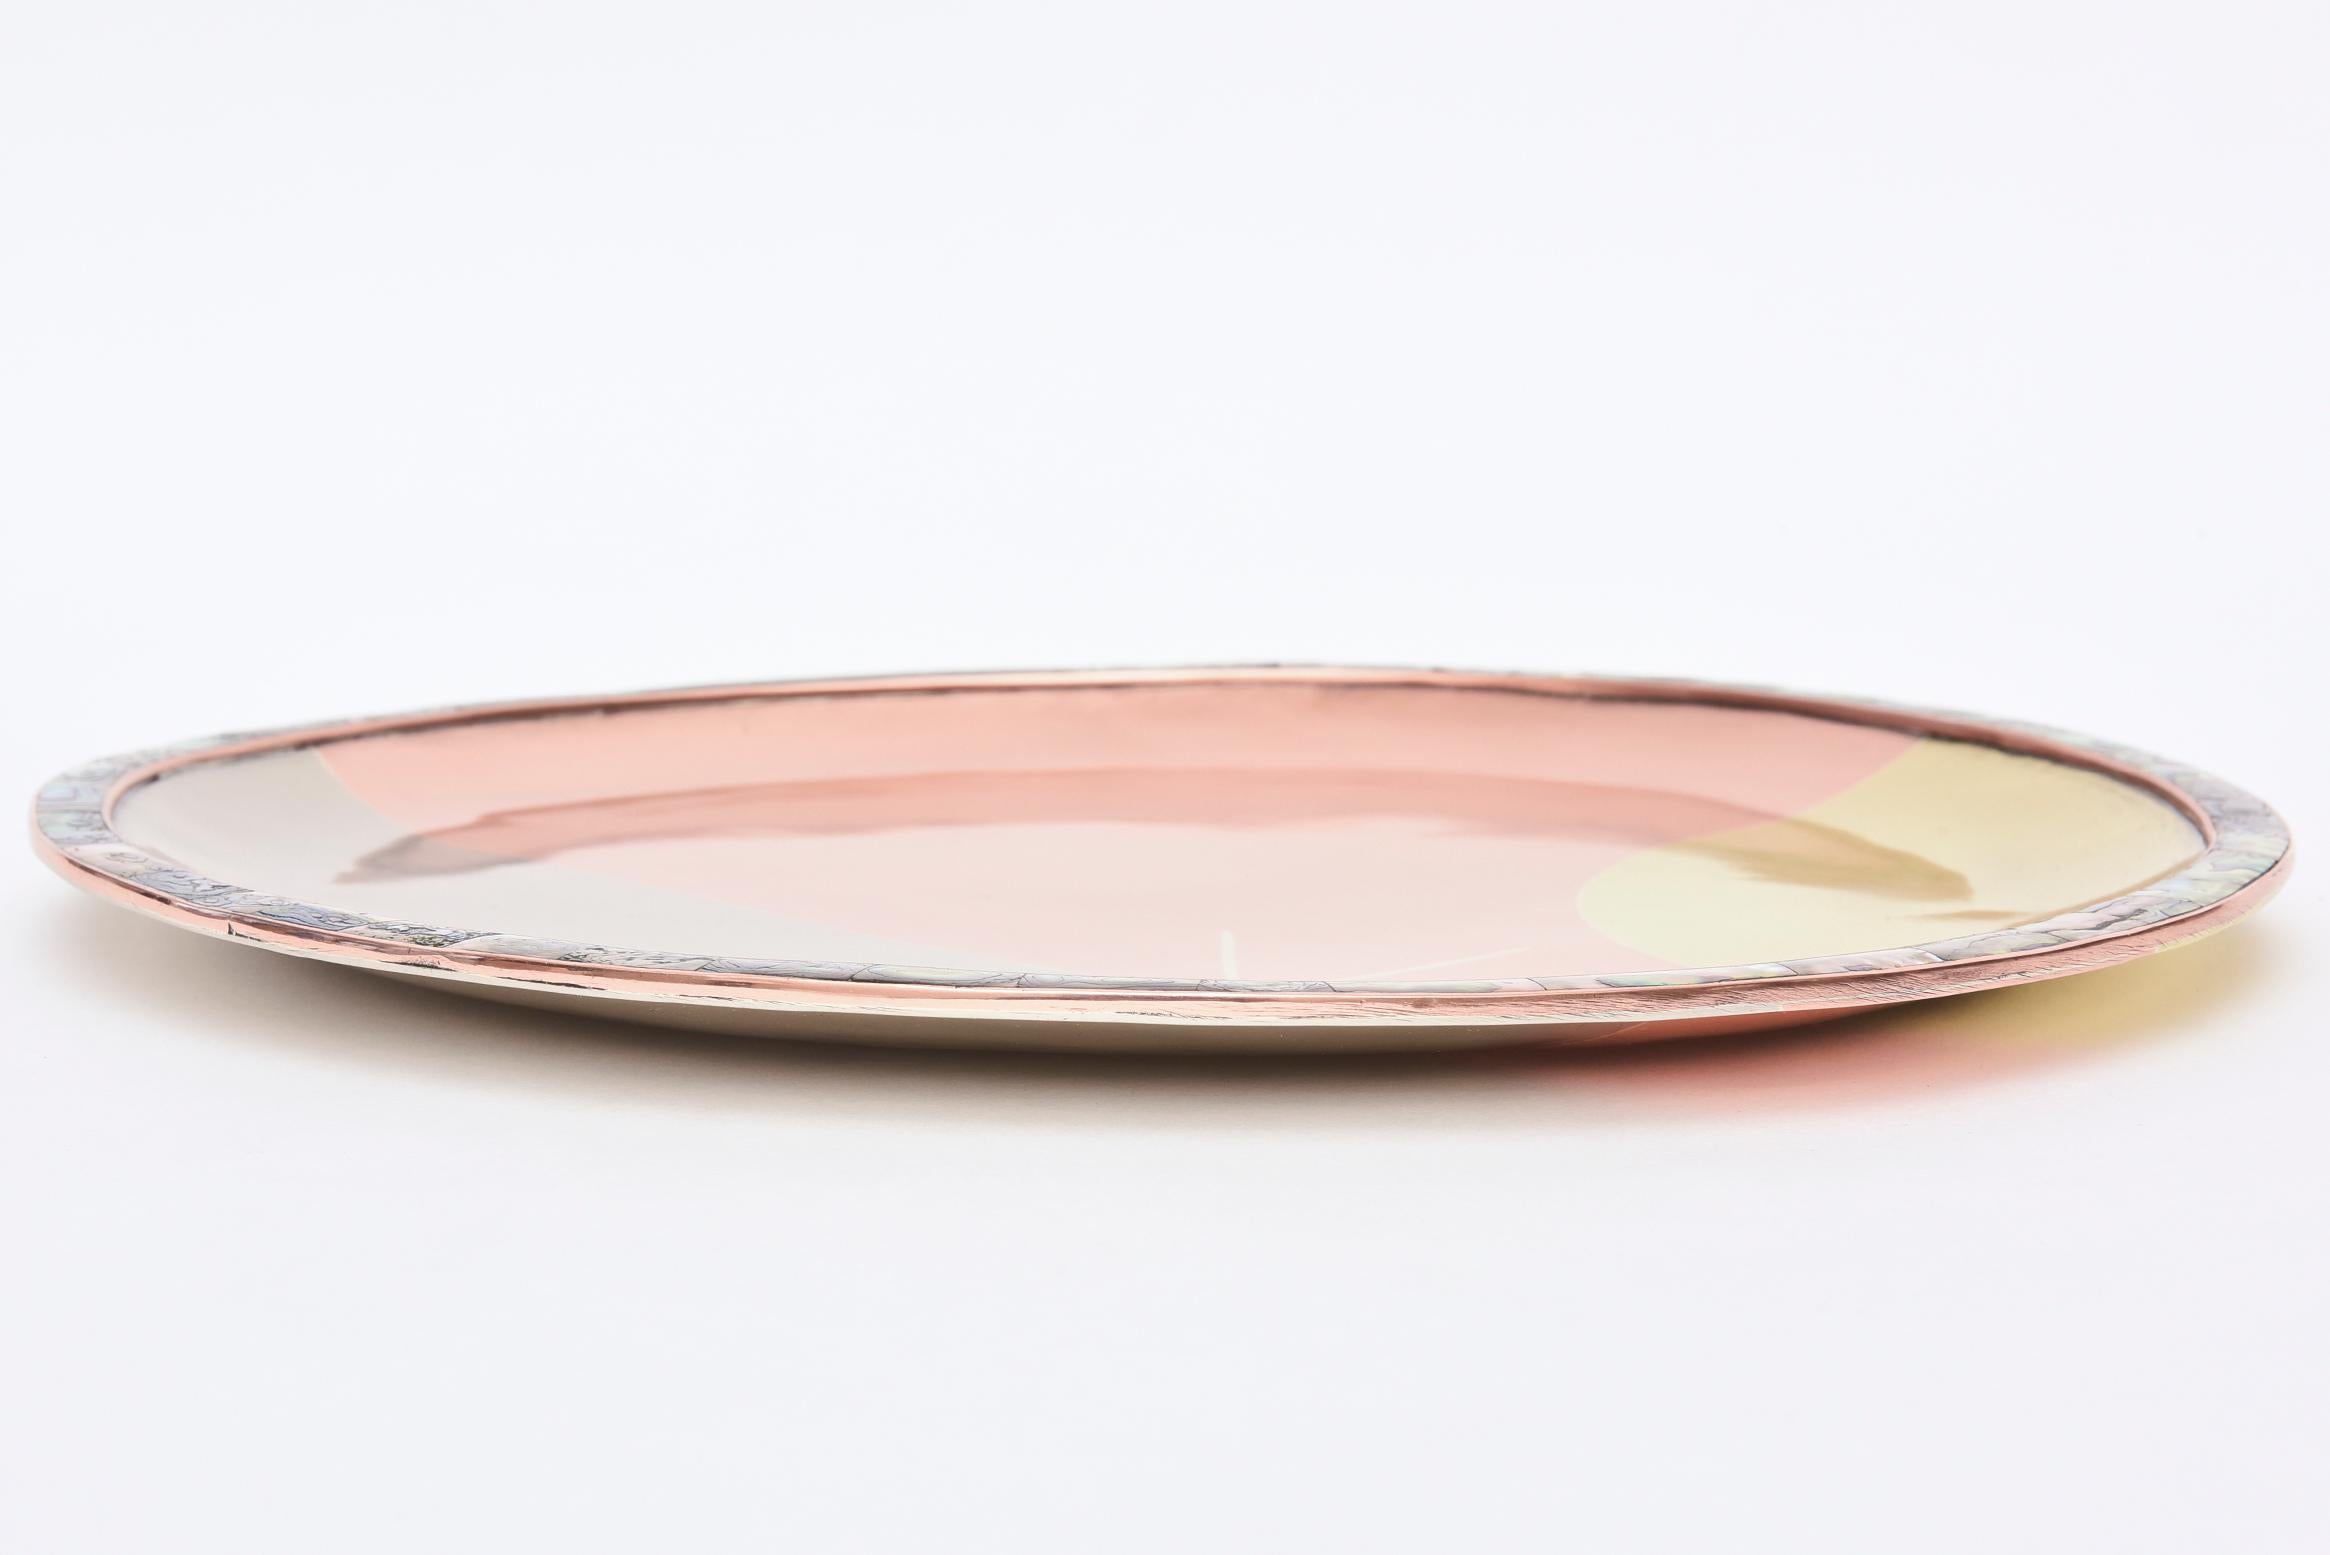 Brass, Copper, Silver, Sterling Silver with Abalone Tray Signed Mid Century (Mitte des 20. Jahrhunderts) im Angebot